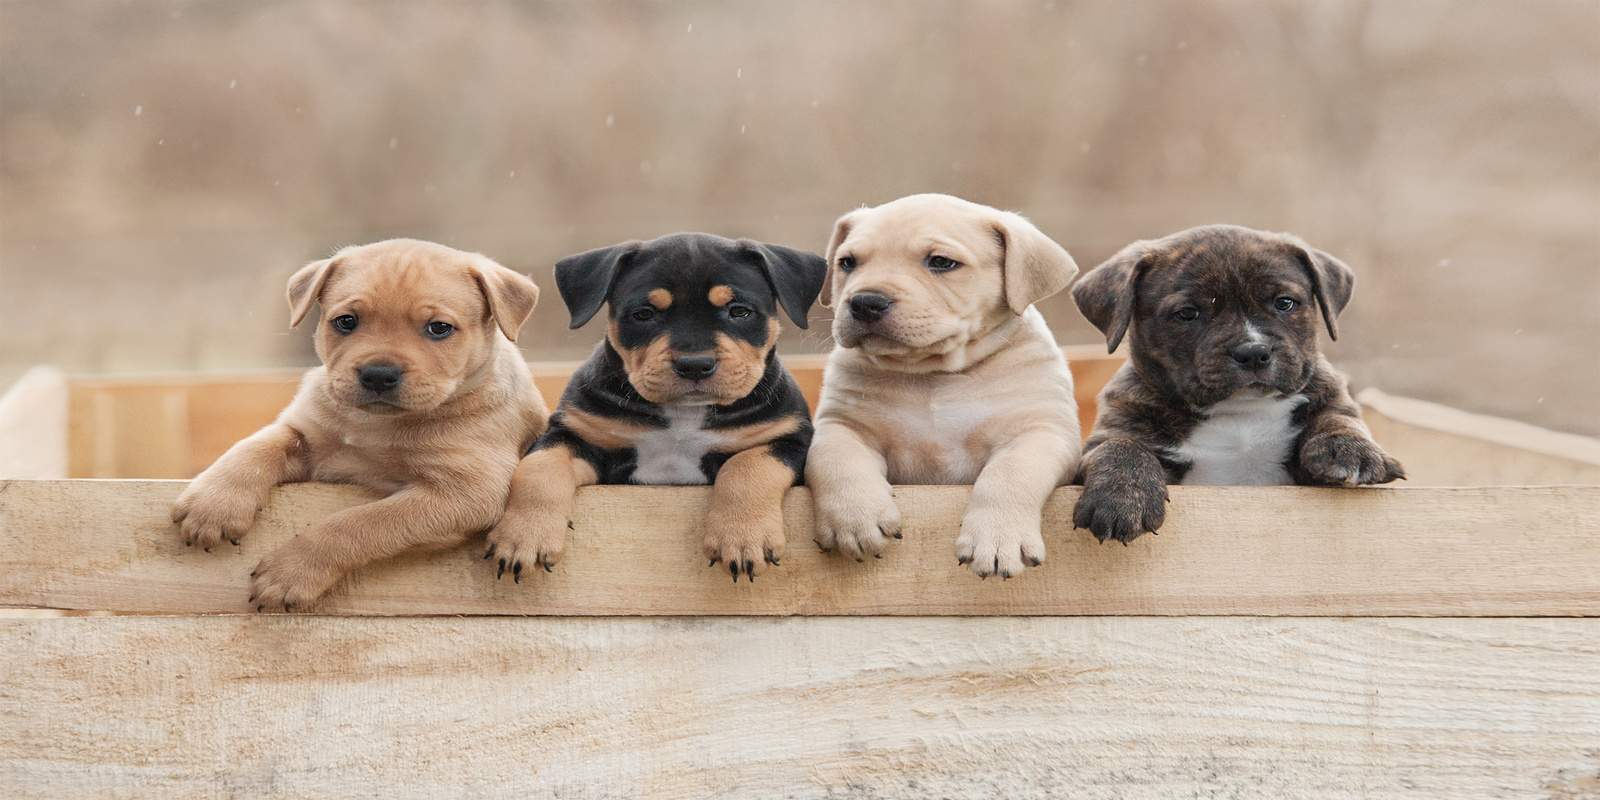 Four puppies in a wooden box